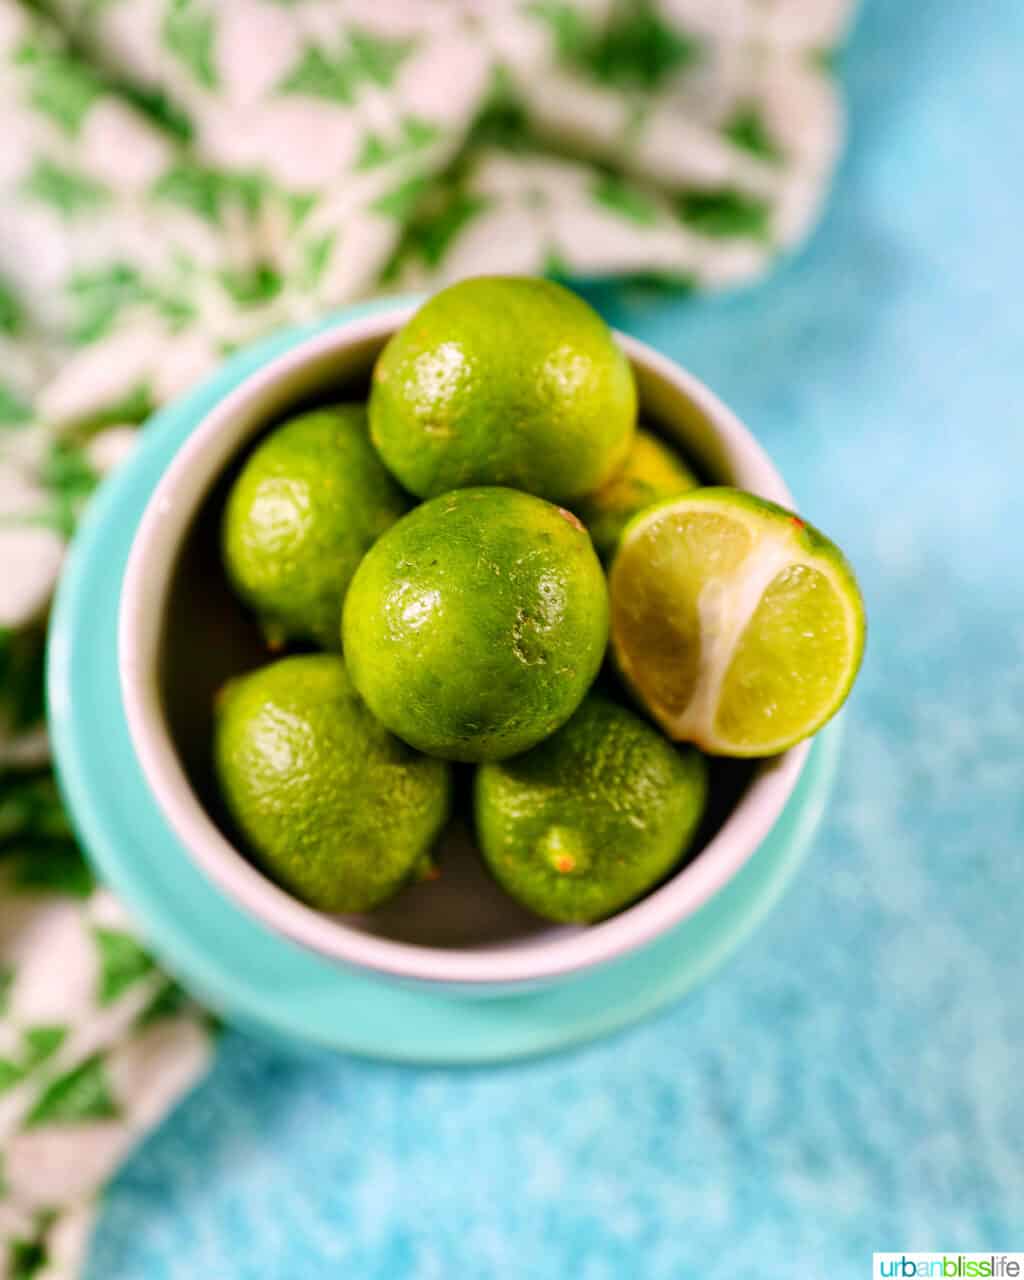 bowl of key limes on a blue background with green and white napkin.